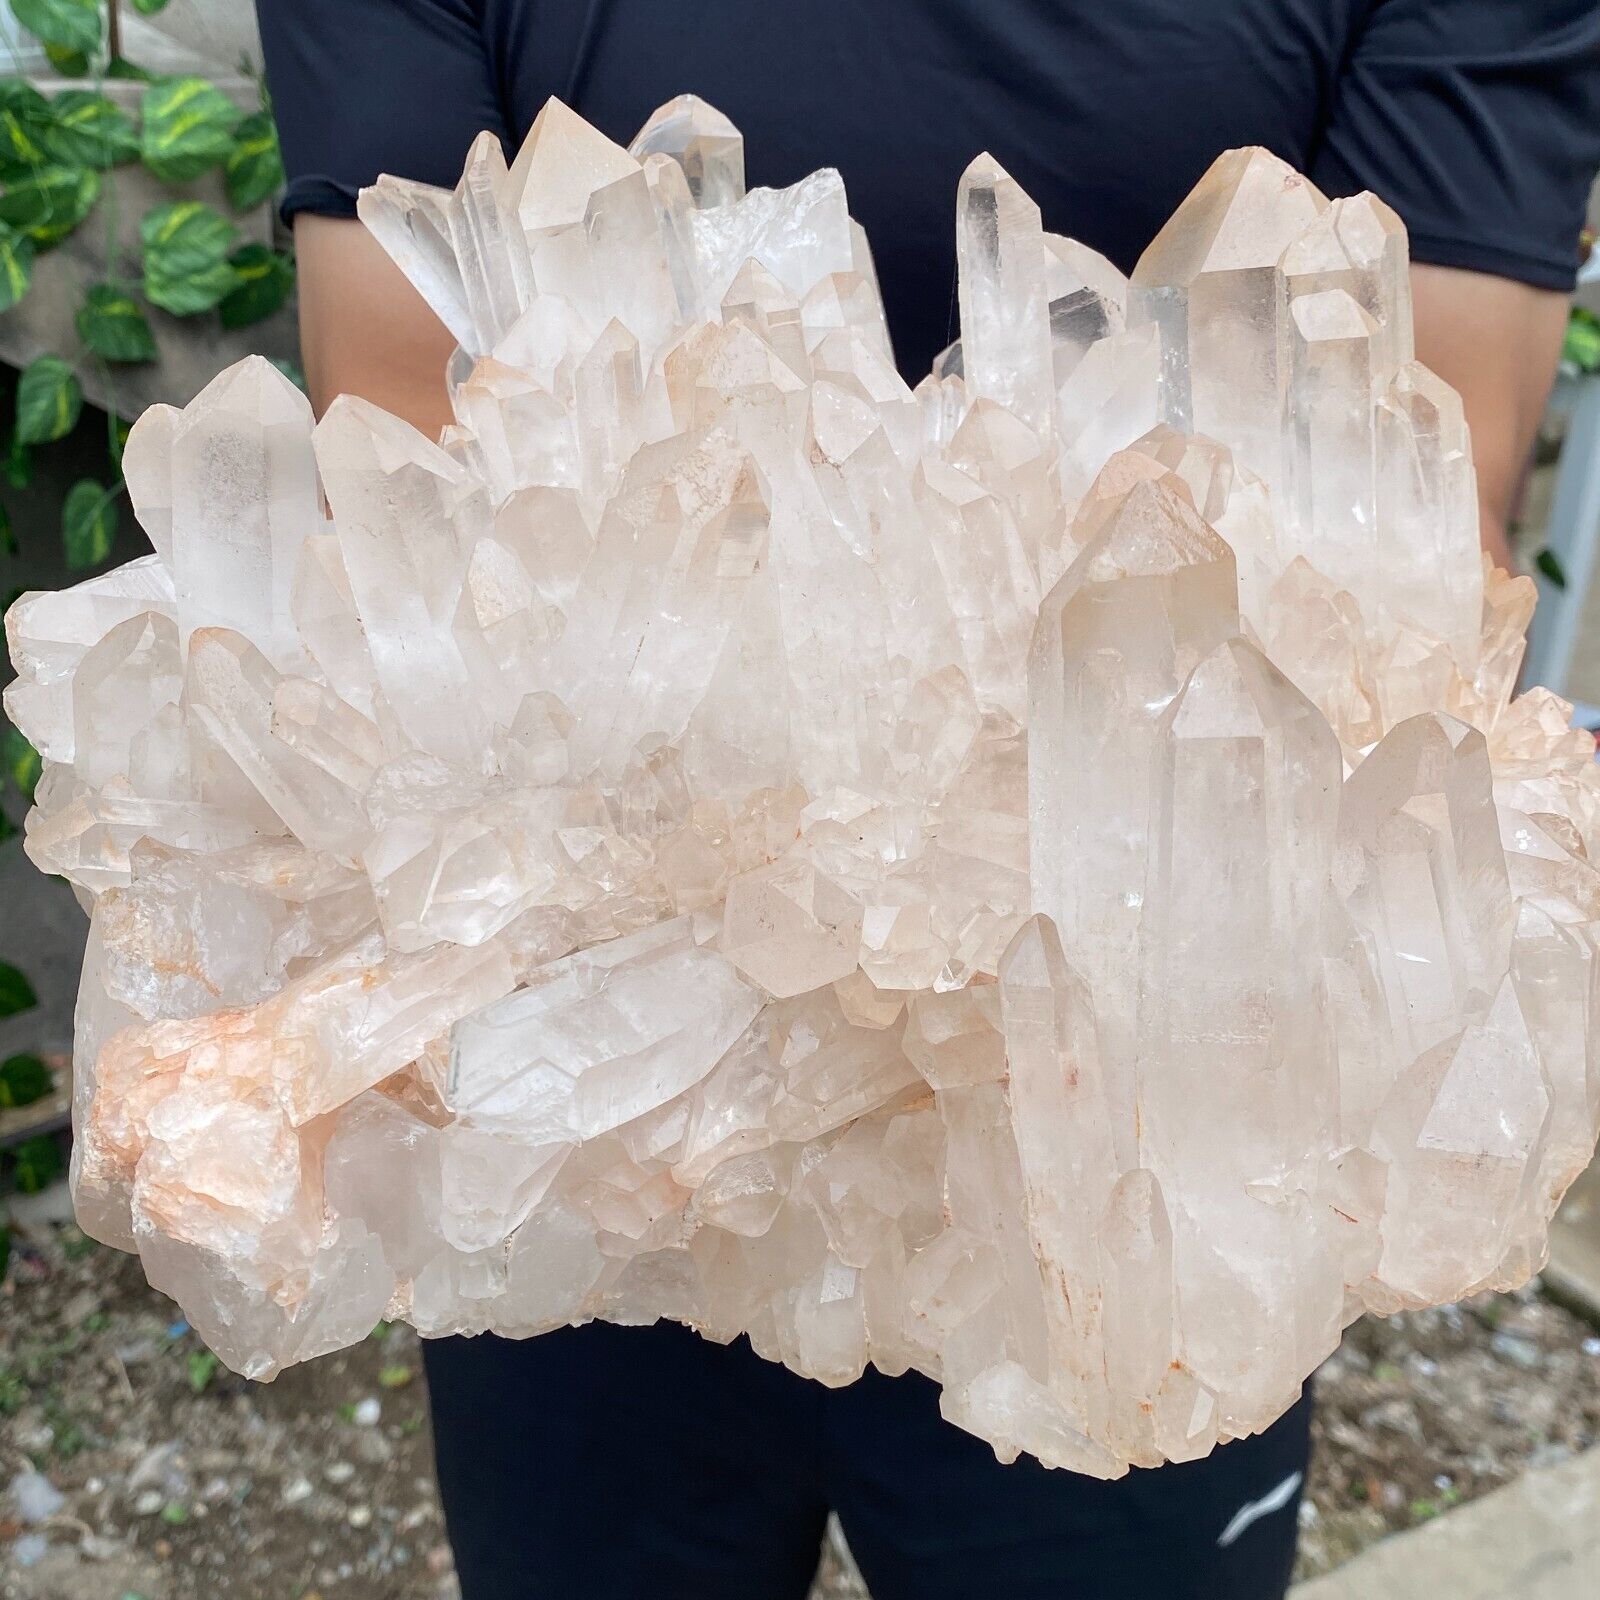 20.8lb A++Large Natural clear white Crystal Himalayan quartz cluster /mineralsls